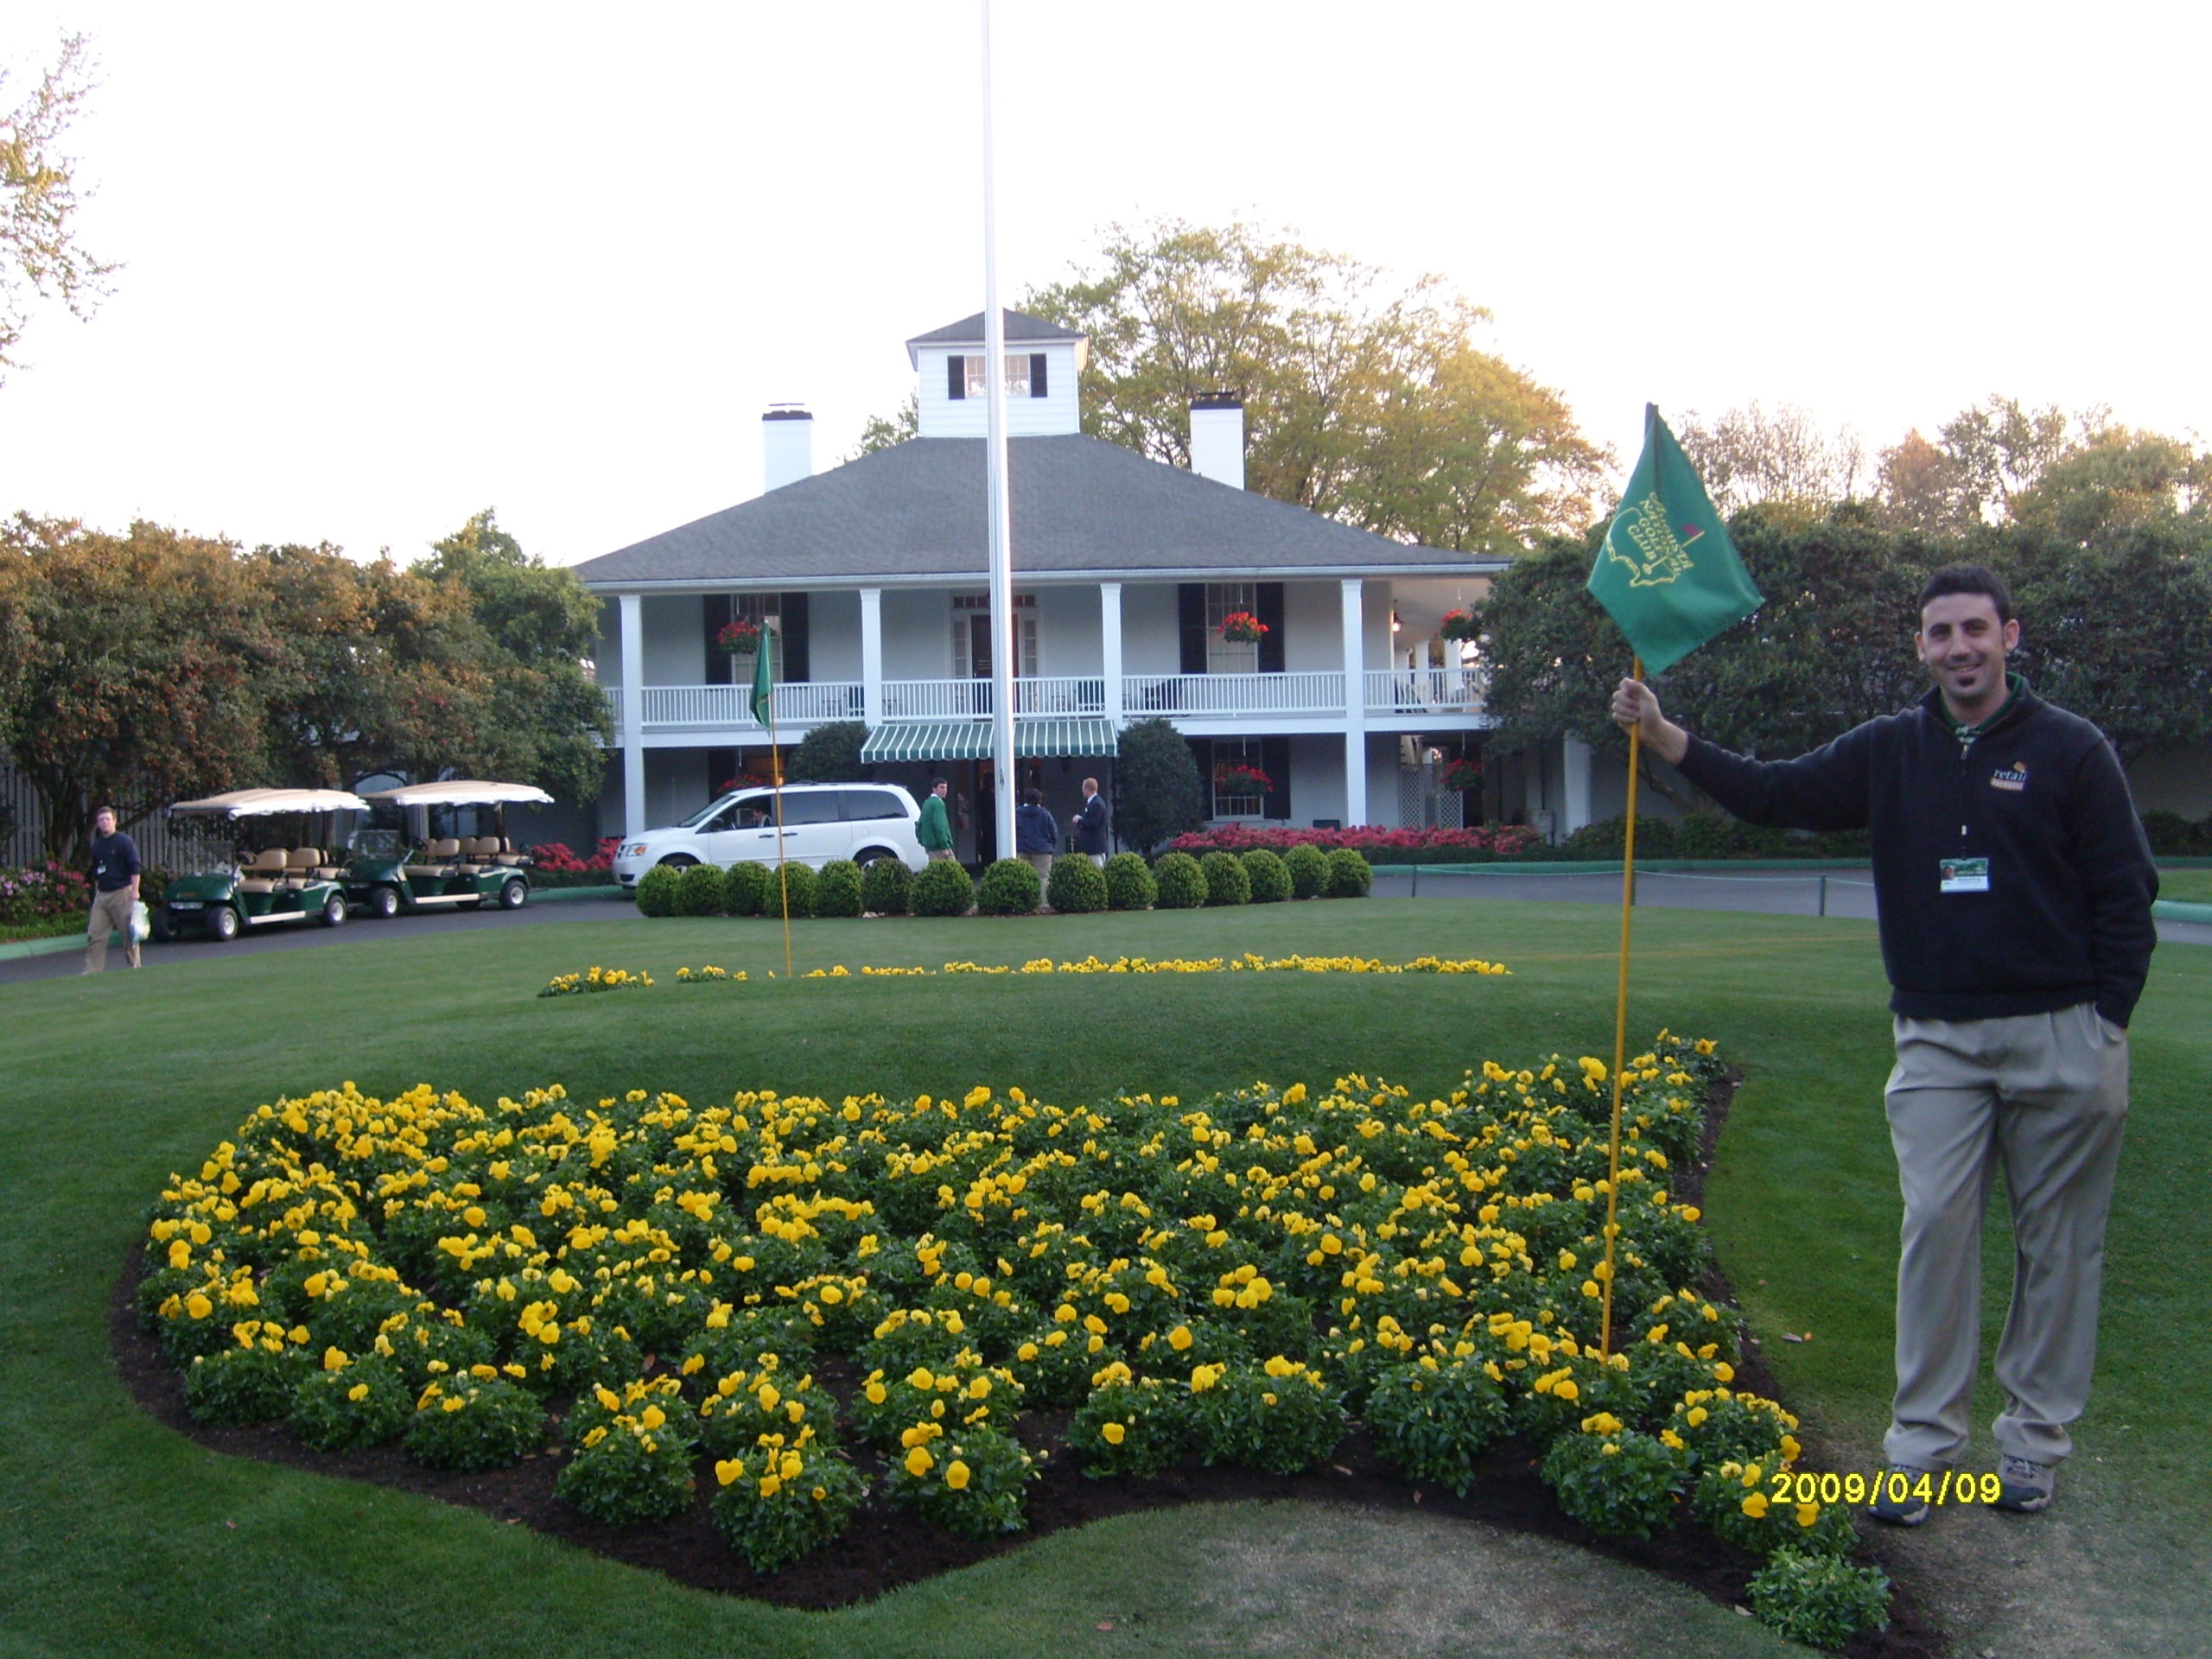 The US Masters – 2009